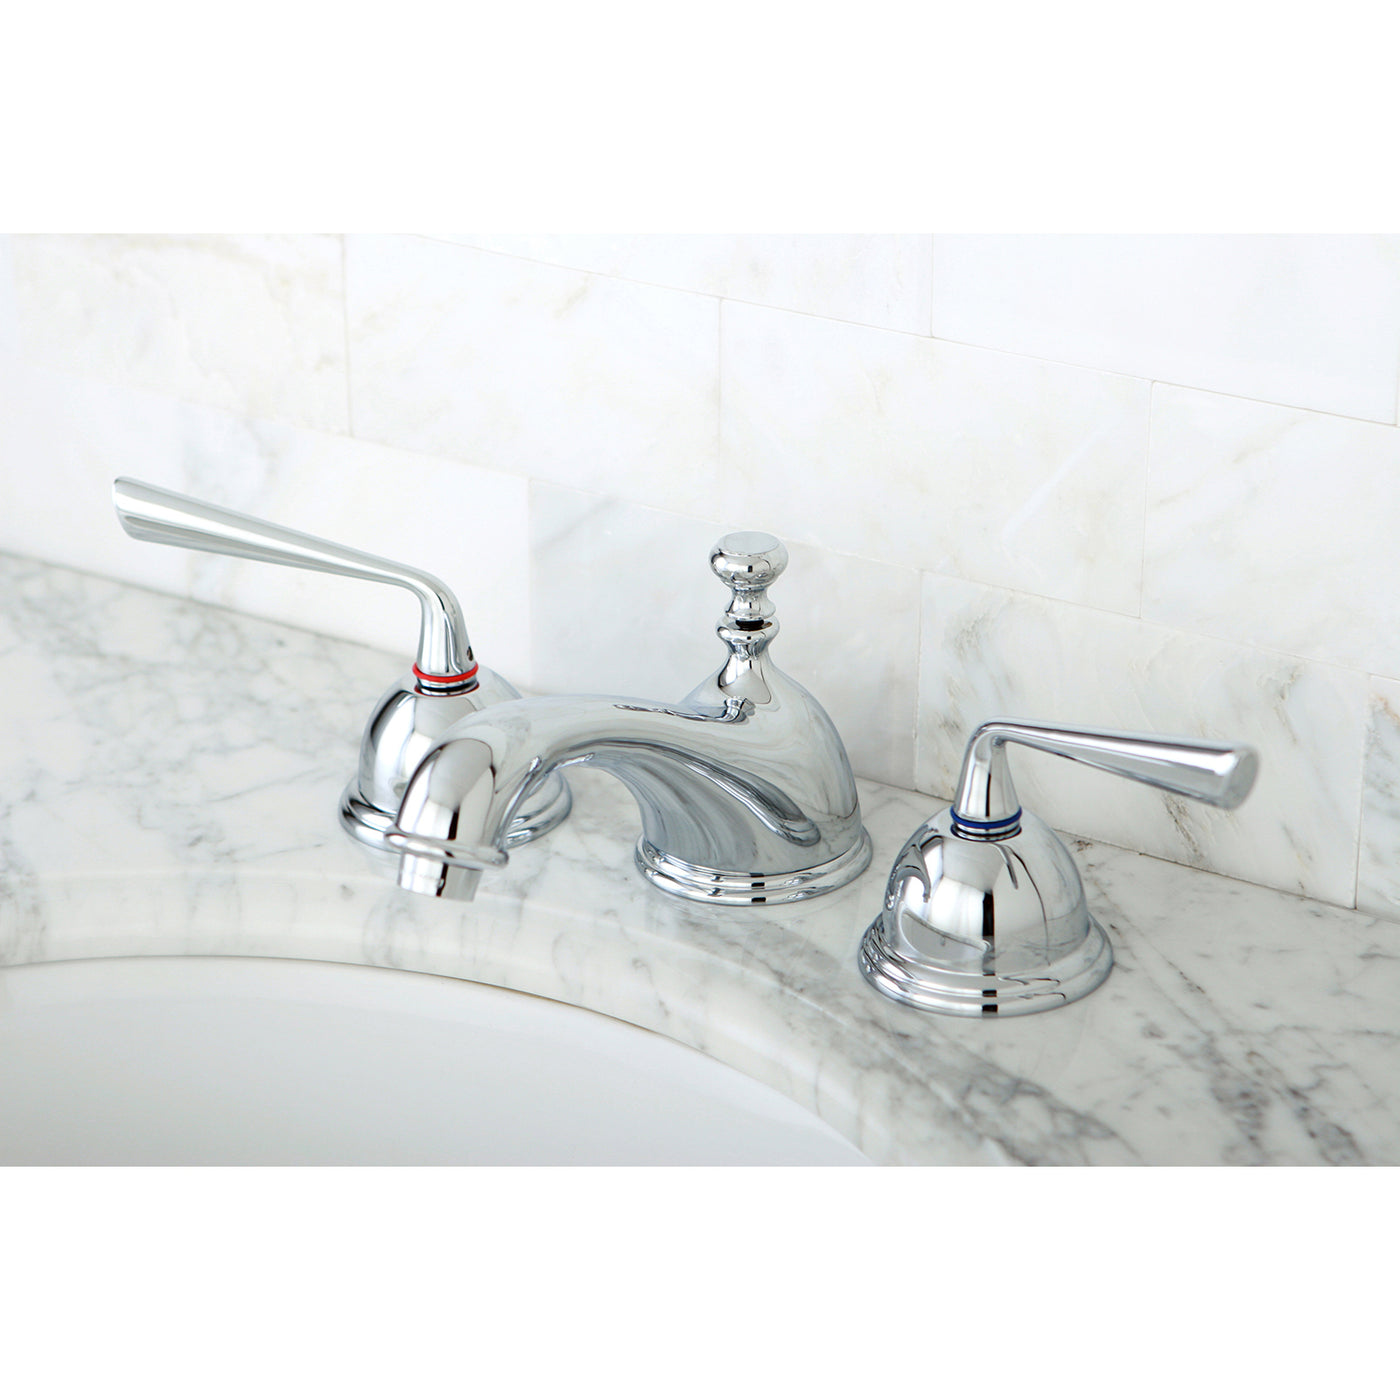 Elements of Design ES3961ZL Widespread Bathroom Faucet with Brass Pop-Up, Polished Chrome